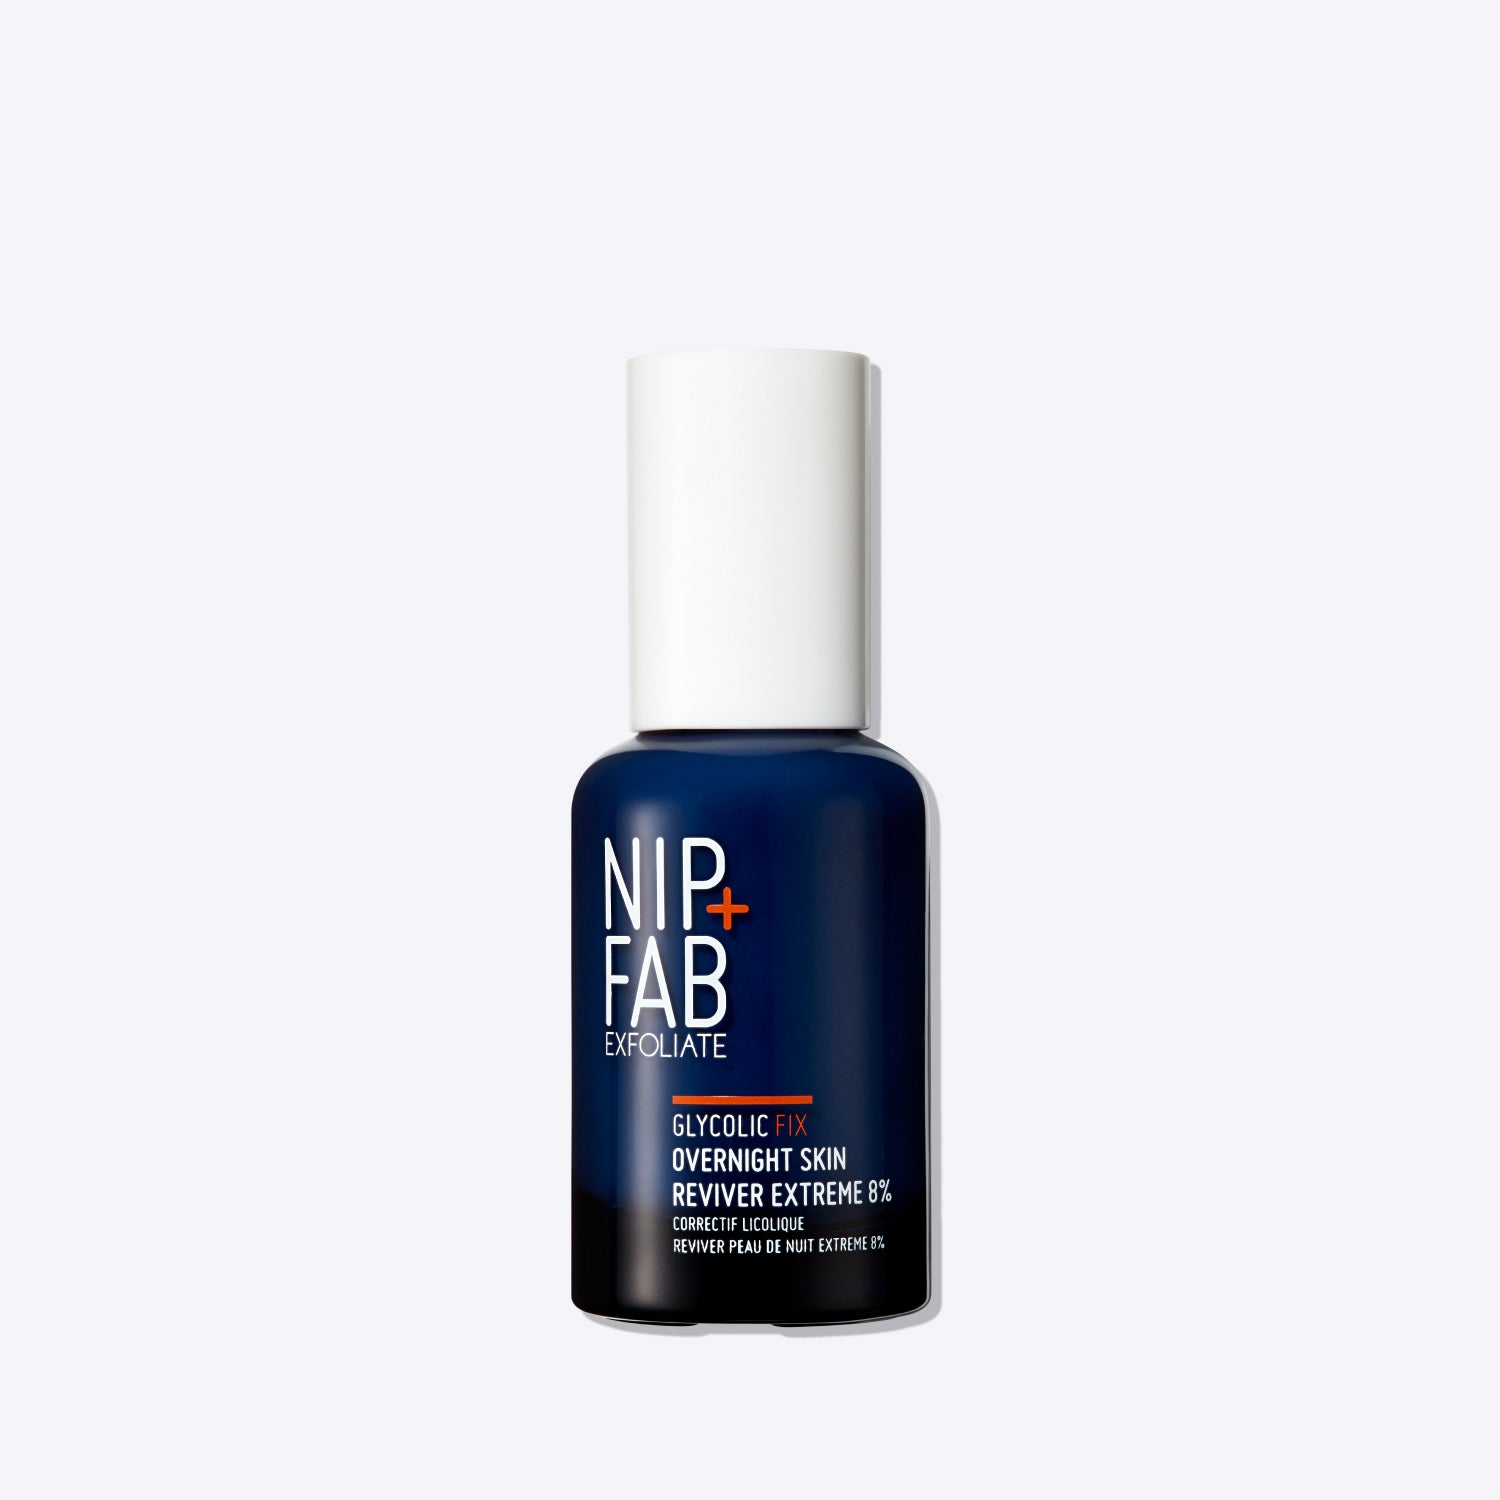 Glycolic Fix Overnight Skin Reviver Extreme 8%